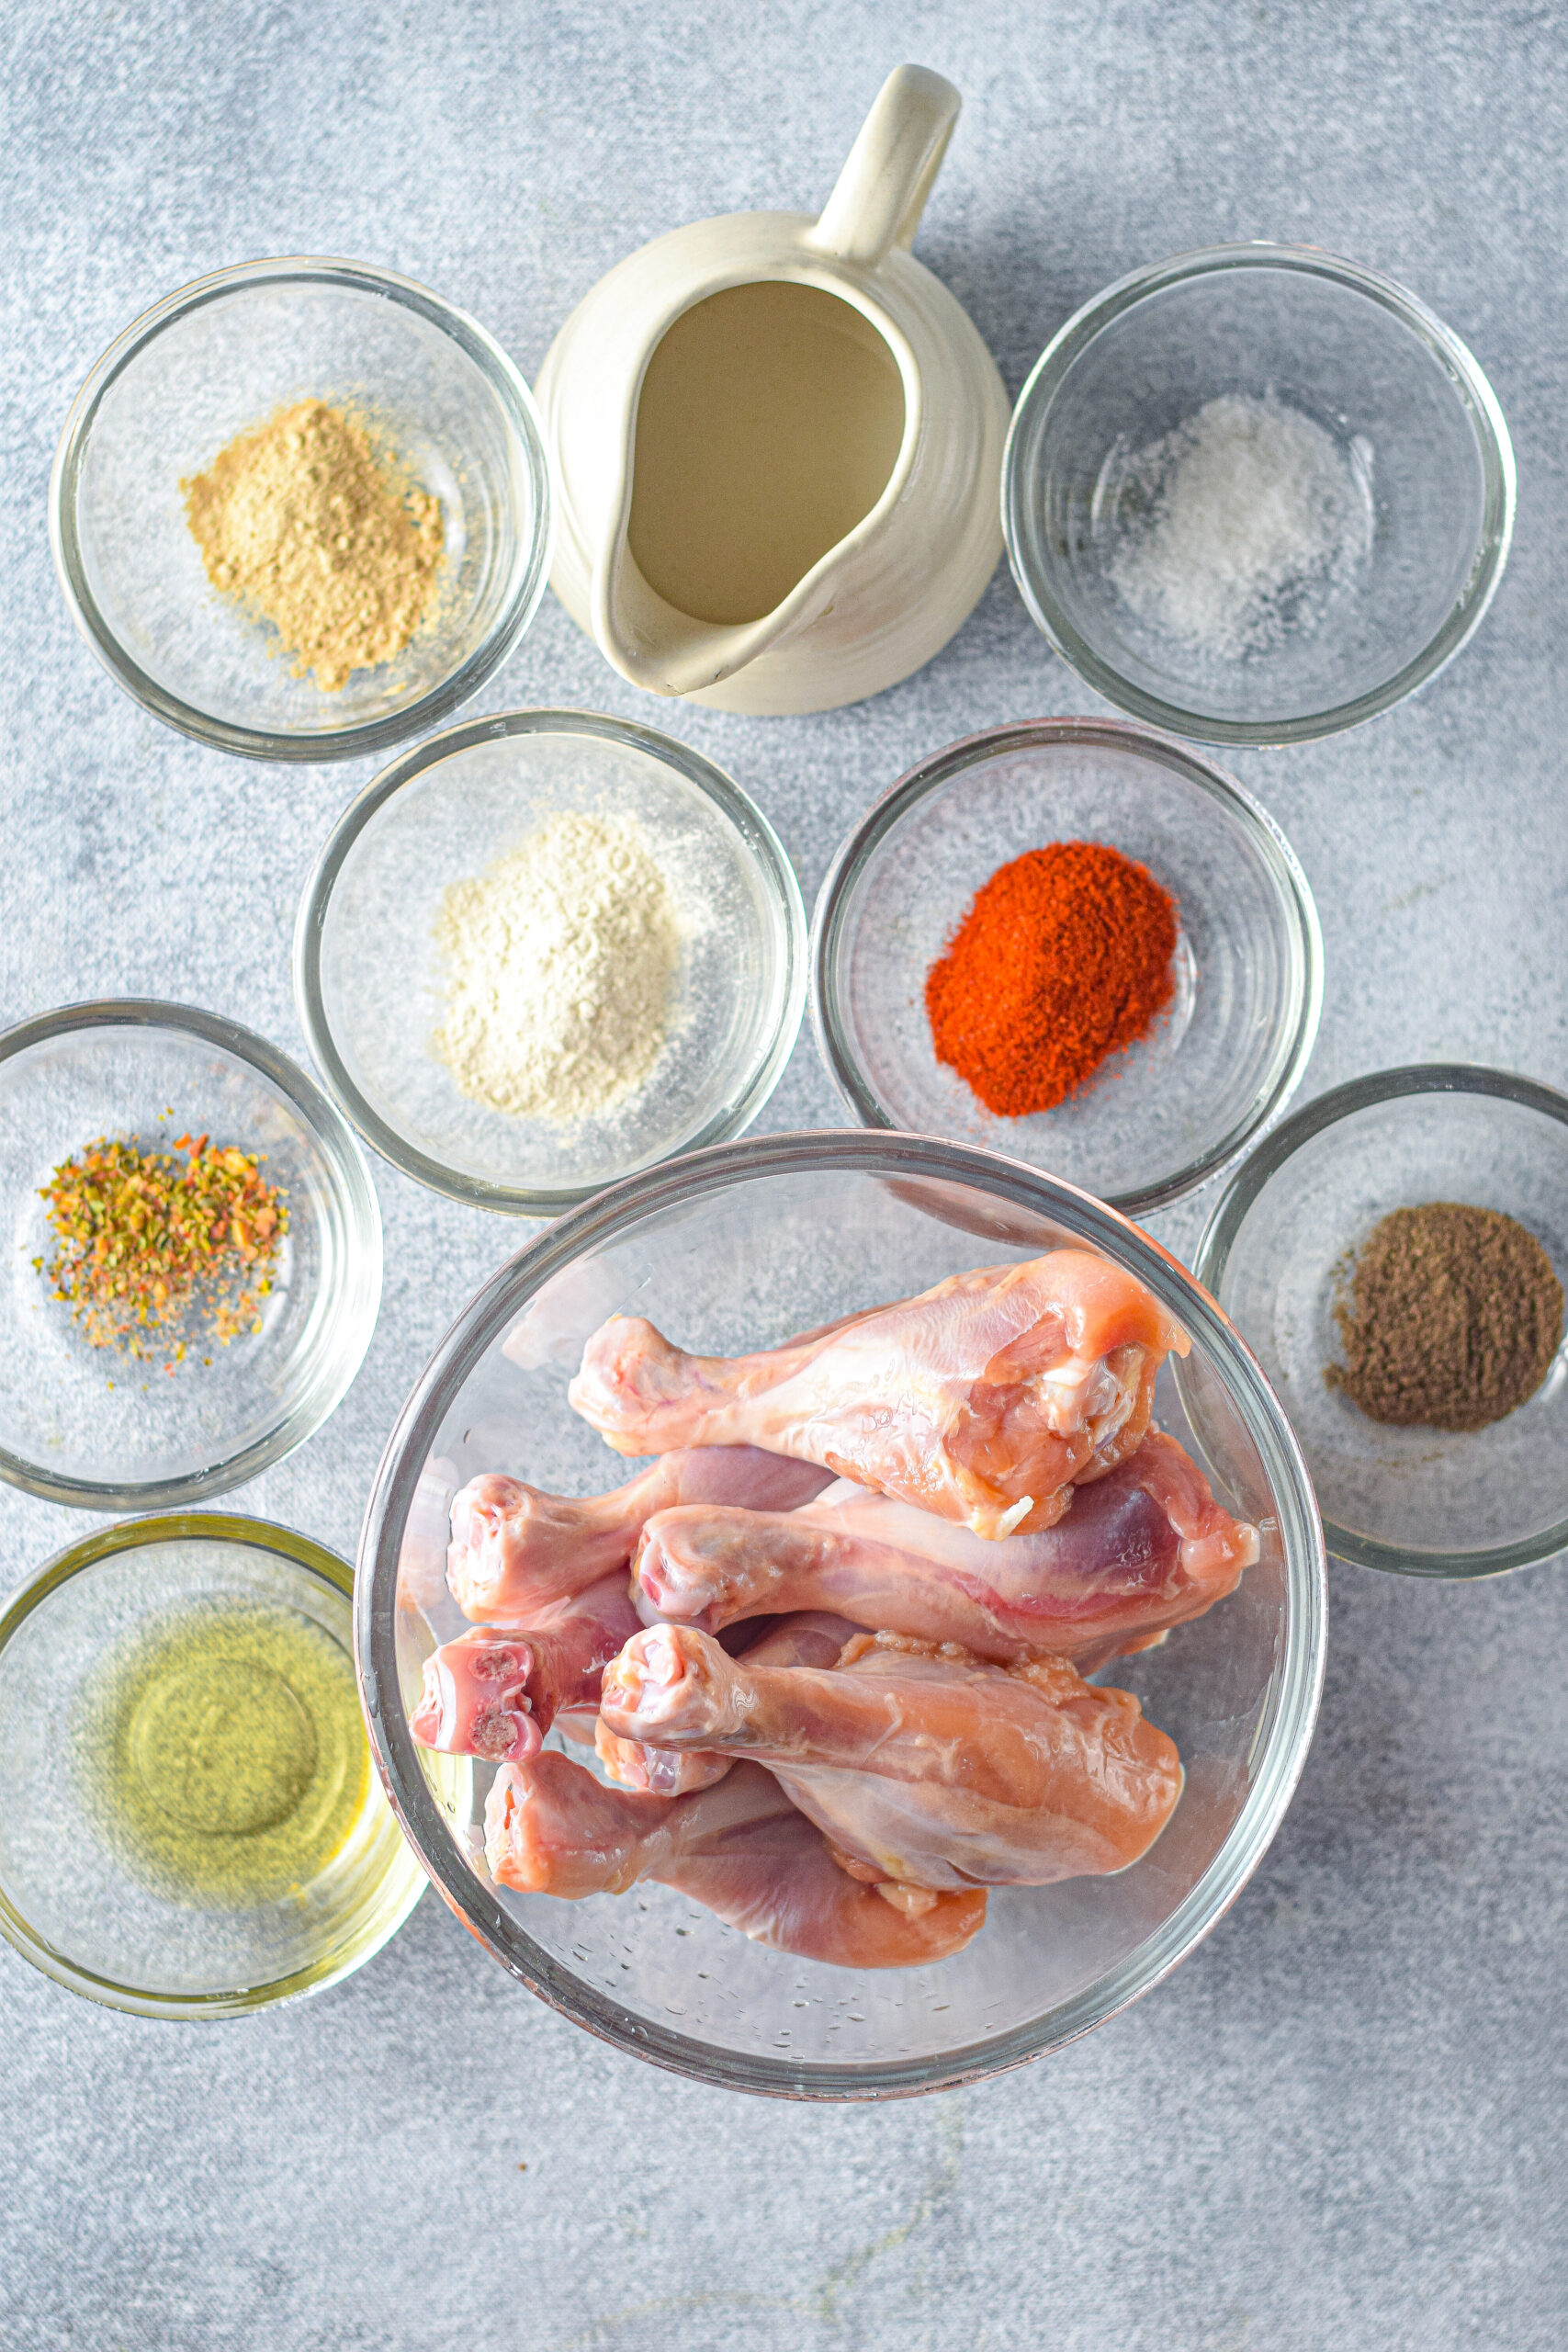 Ingredients for instant pot chicken drumsticks in small individual glass bowls.